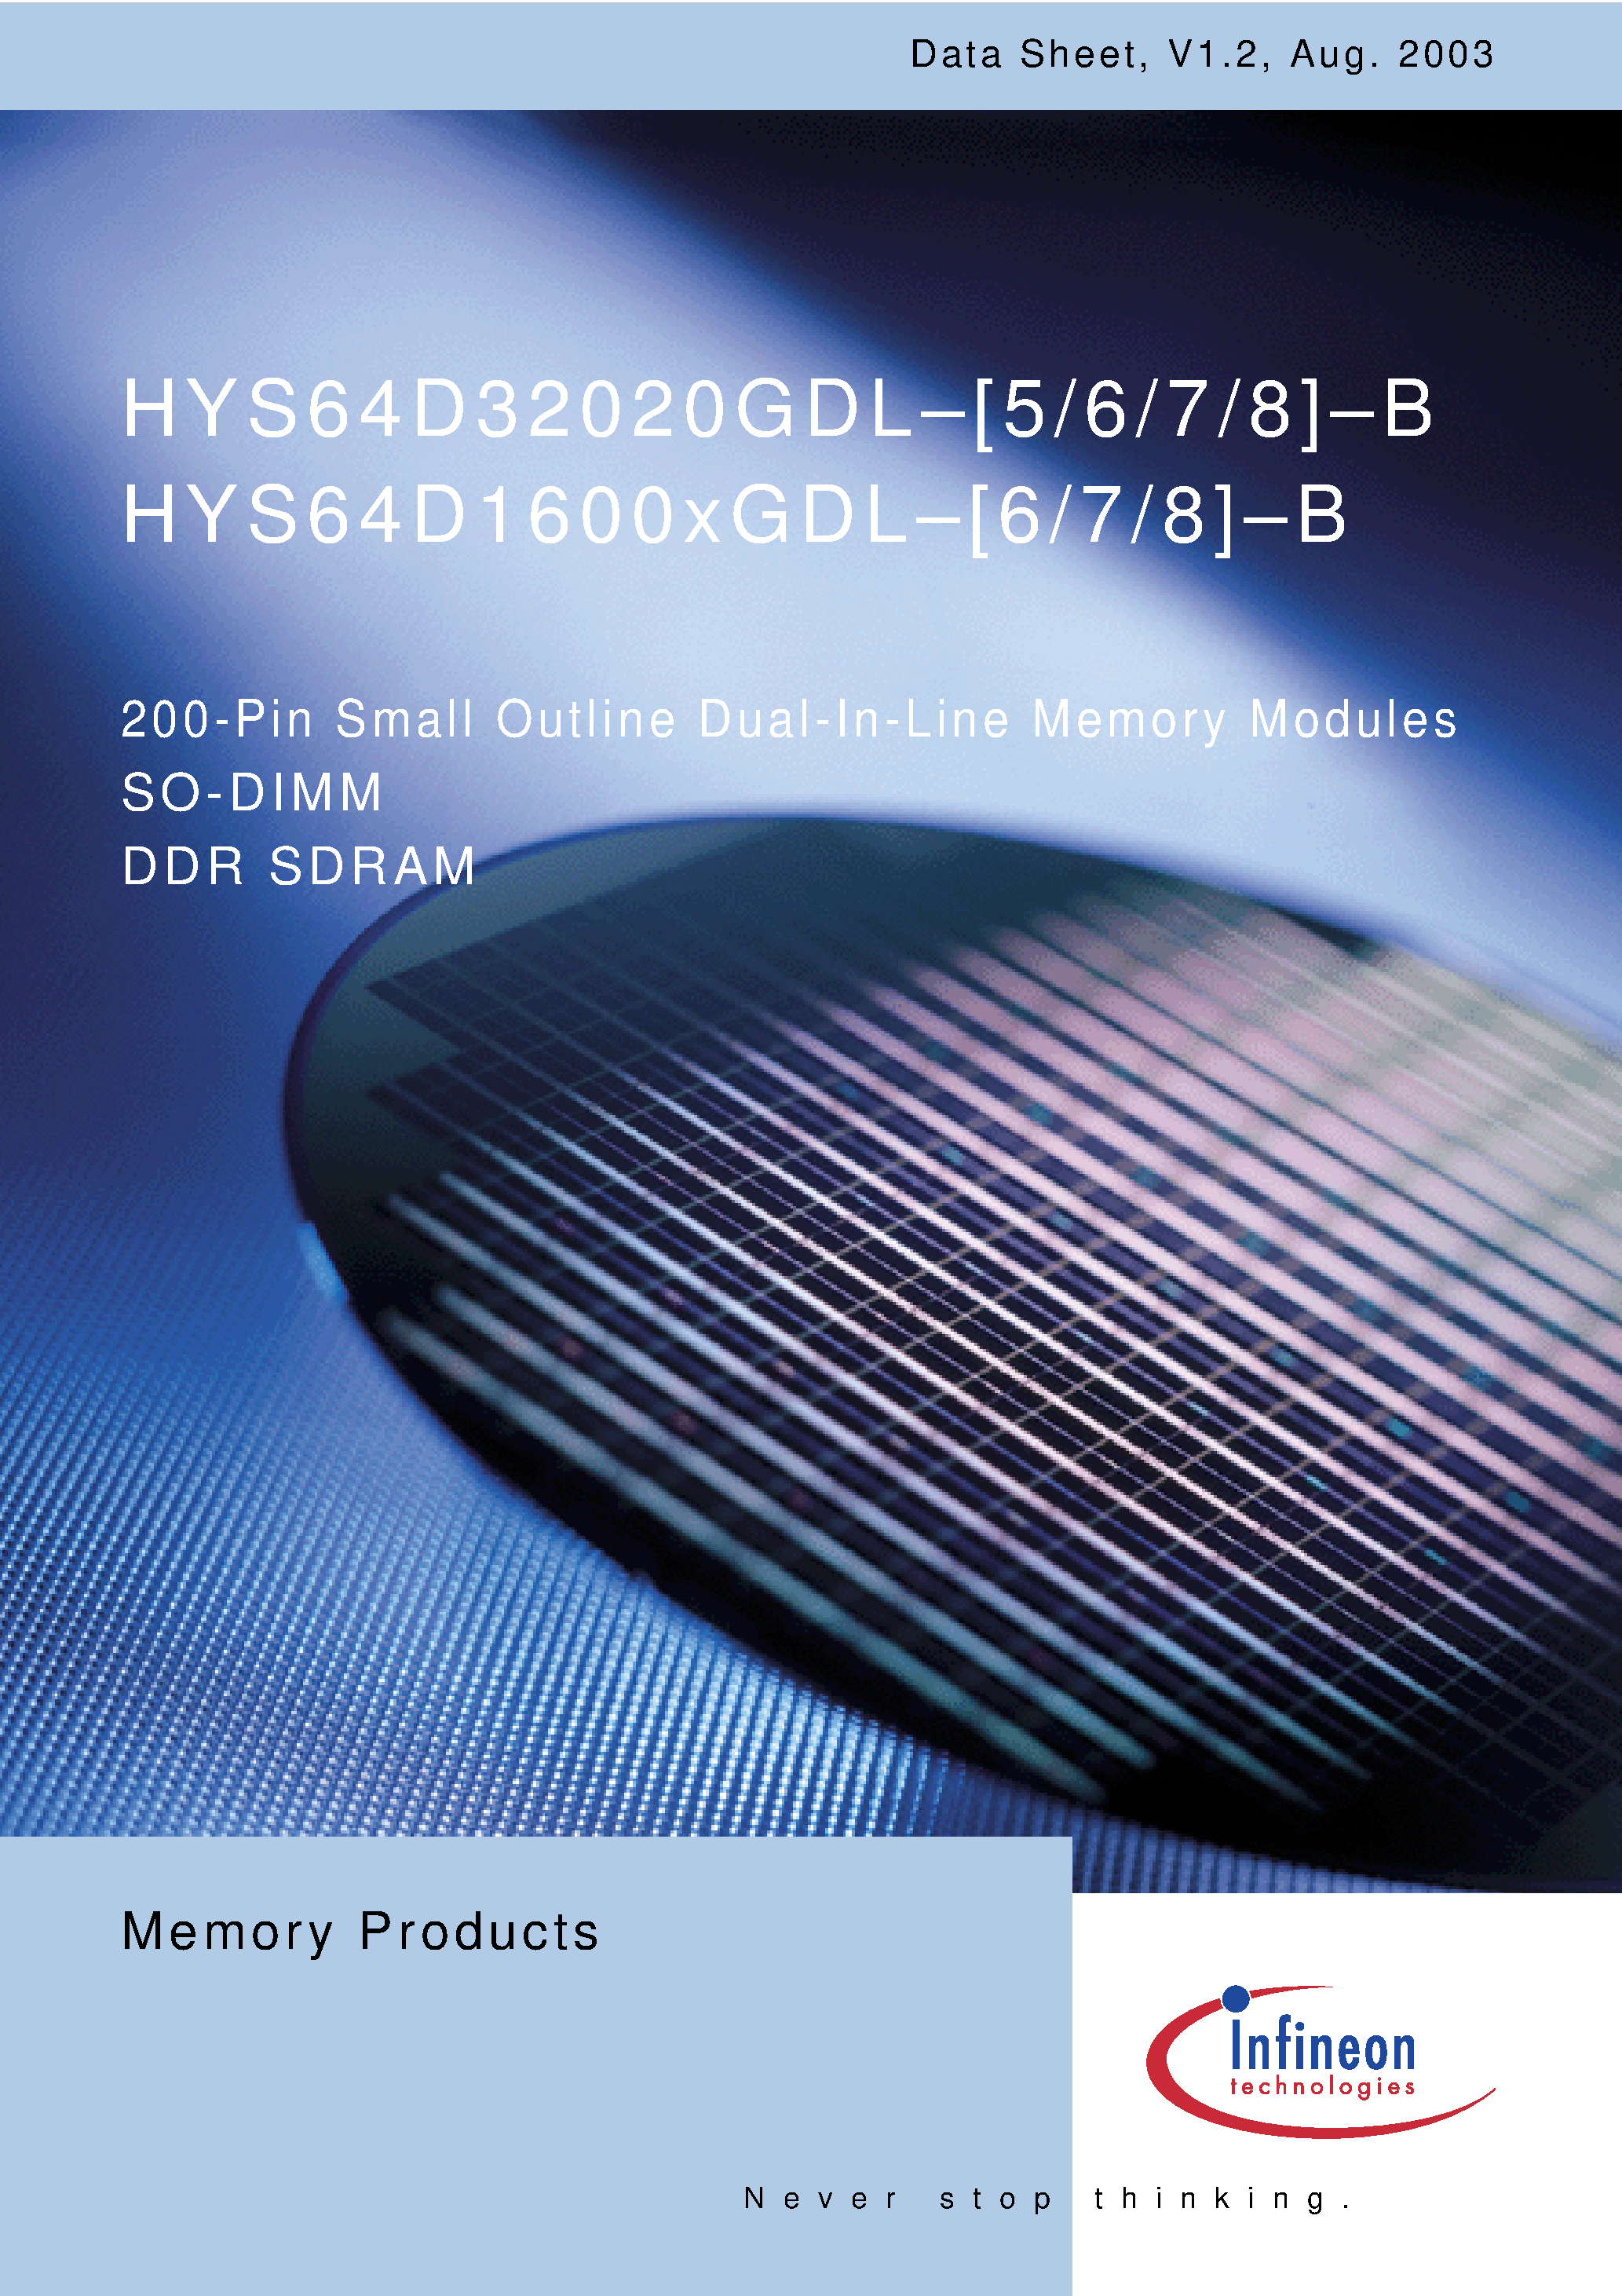 Datasheet HYS64D32020GDL-6-B - 200-Pin Small Outline Dual-In-Line Memory Modules page 1